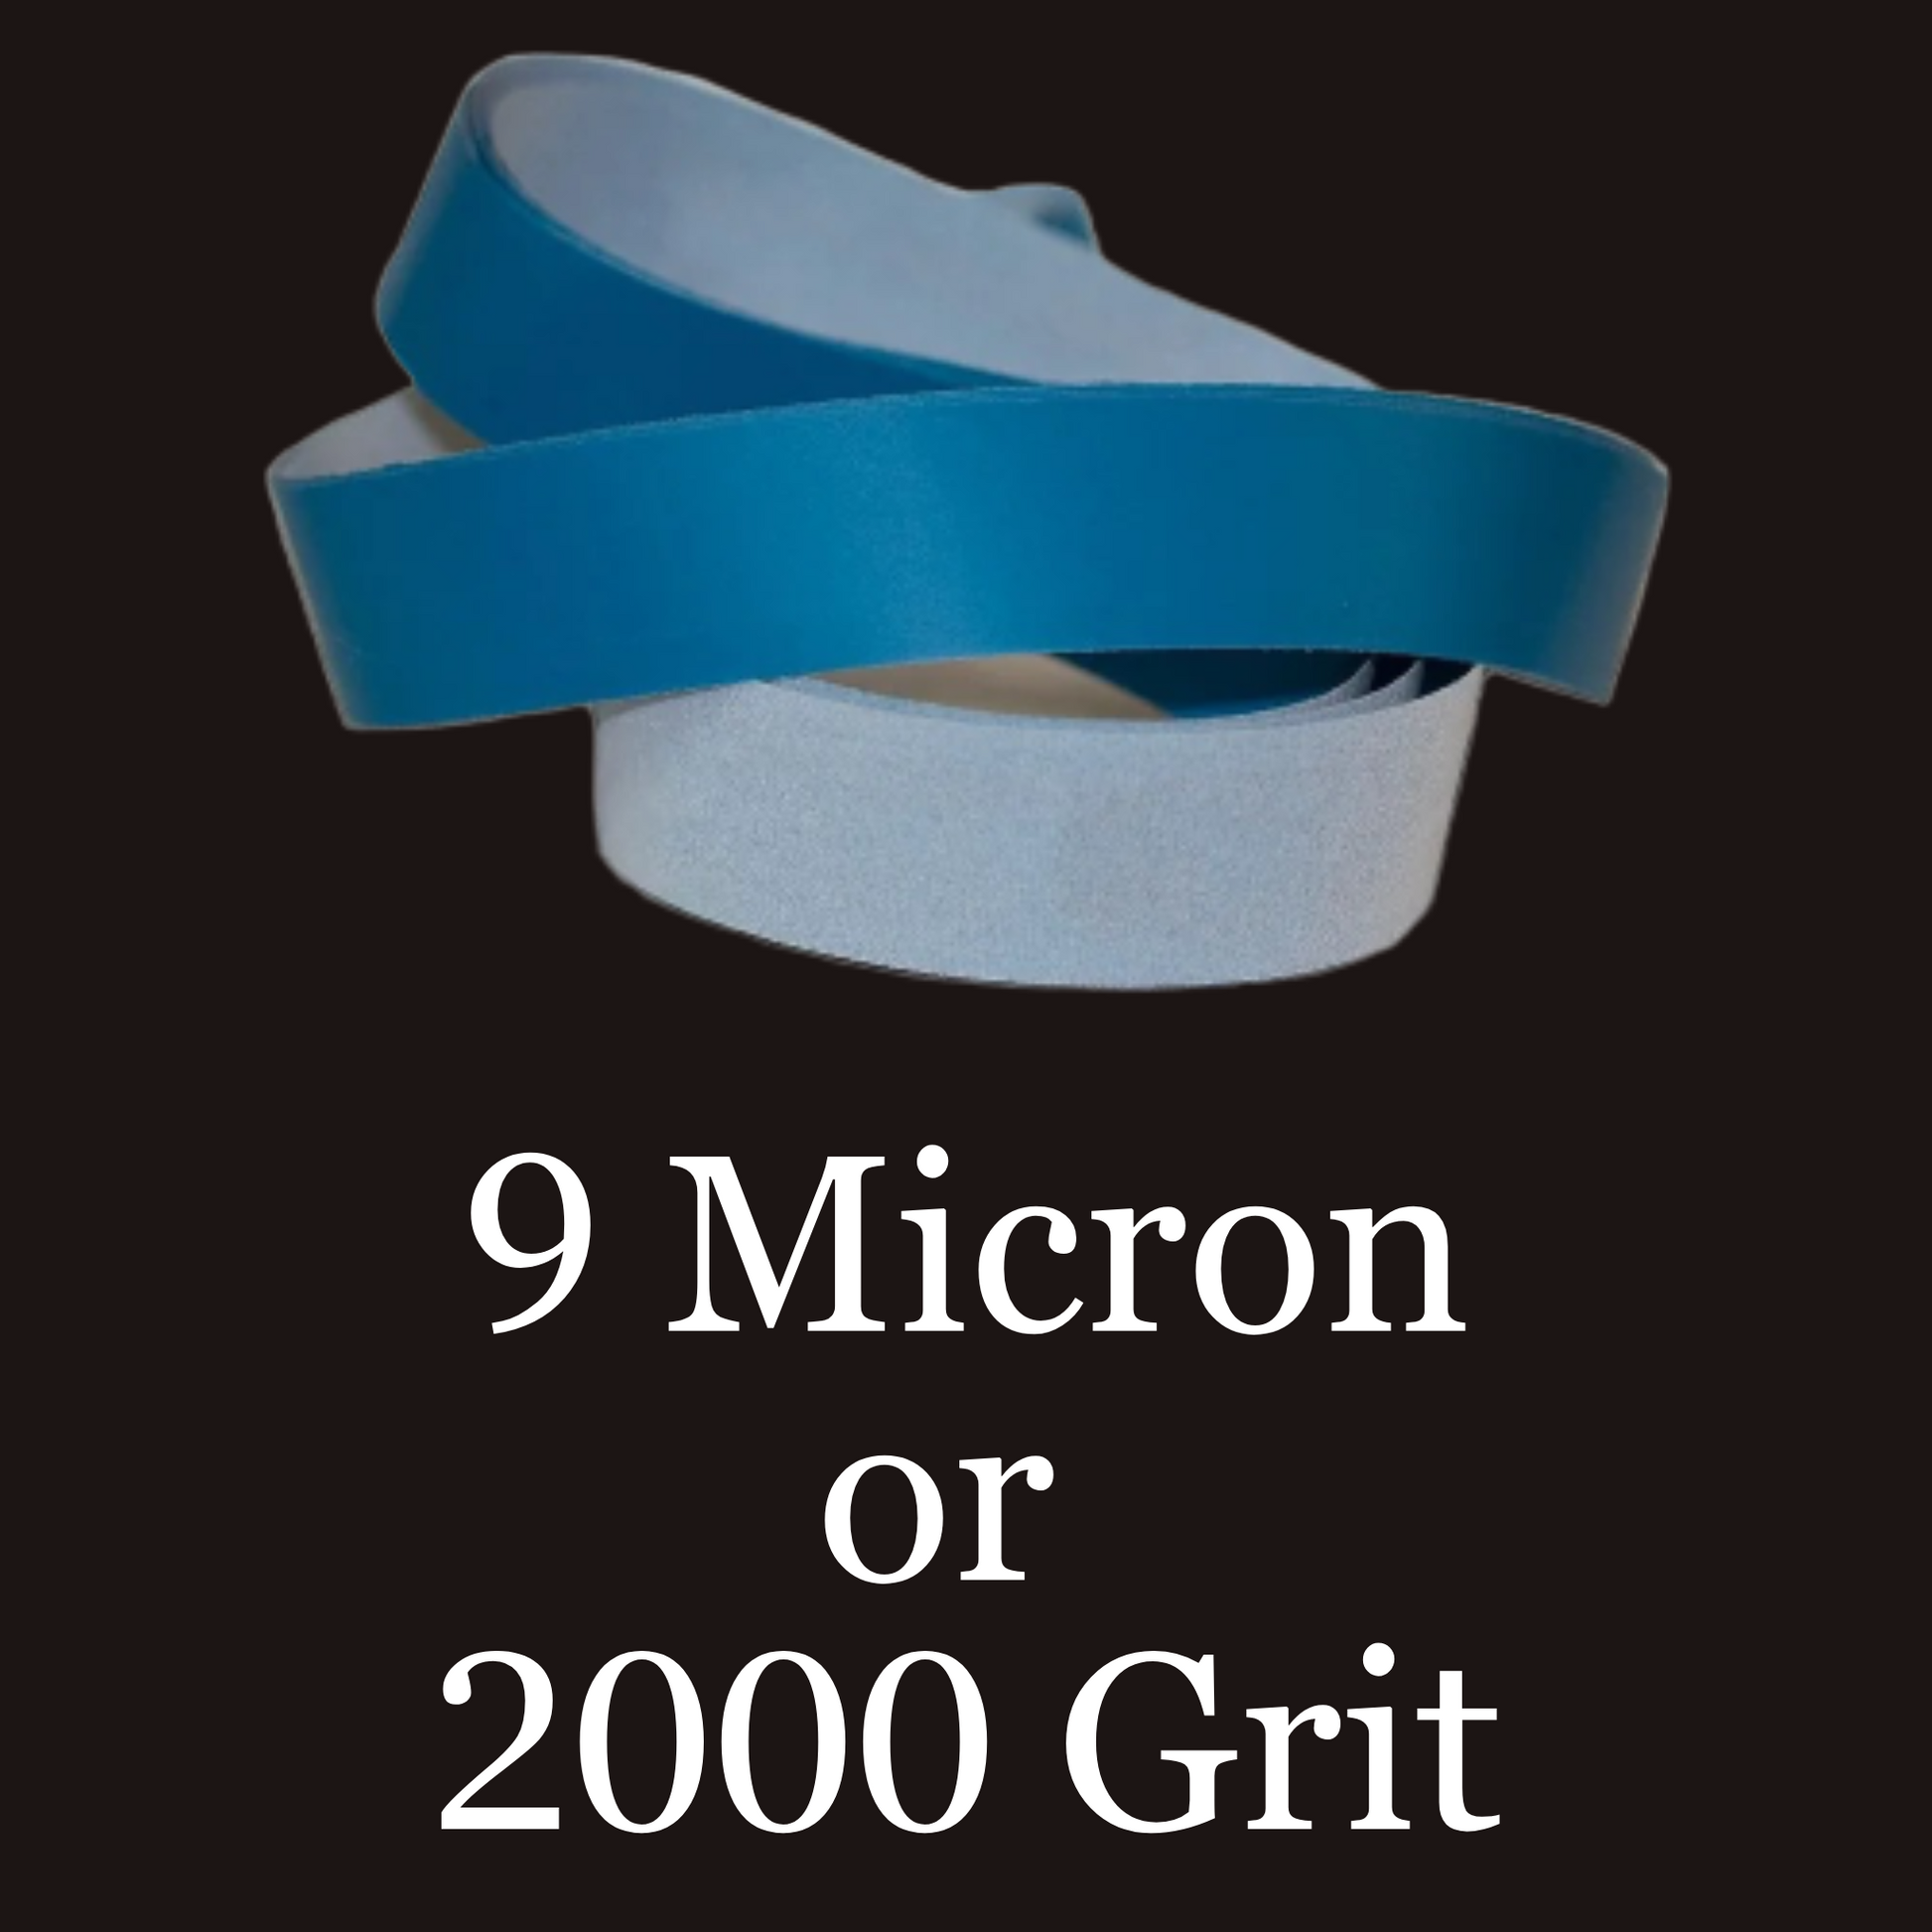 2” x 72” Film Micron Graded Finishing Belts 9 Micron or 2000 Grit